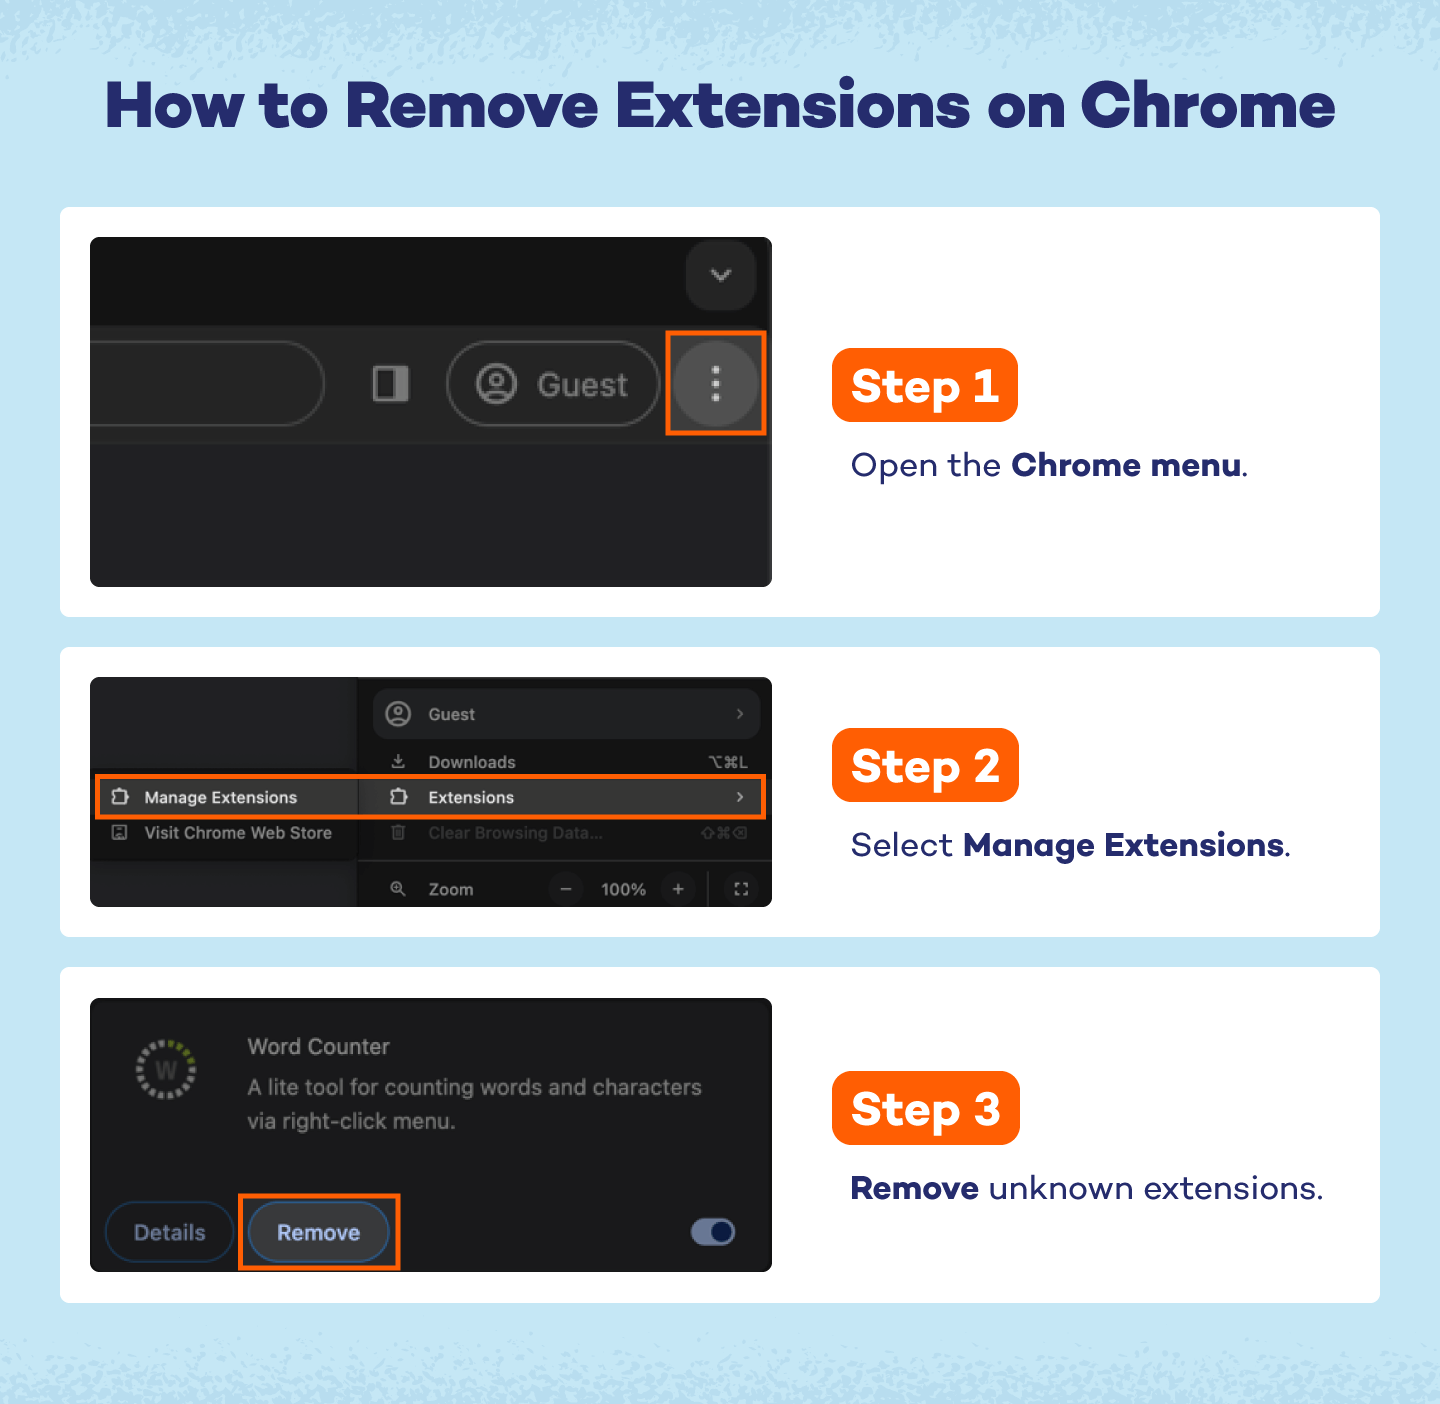 How to remove extension on Chrome